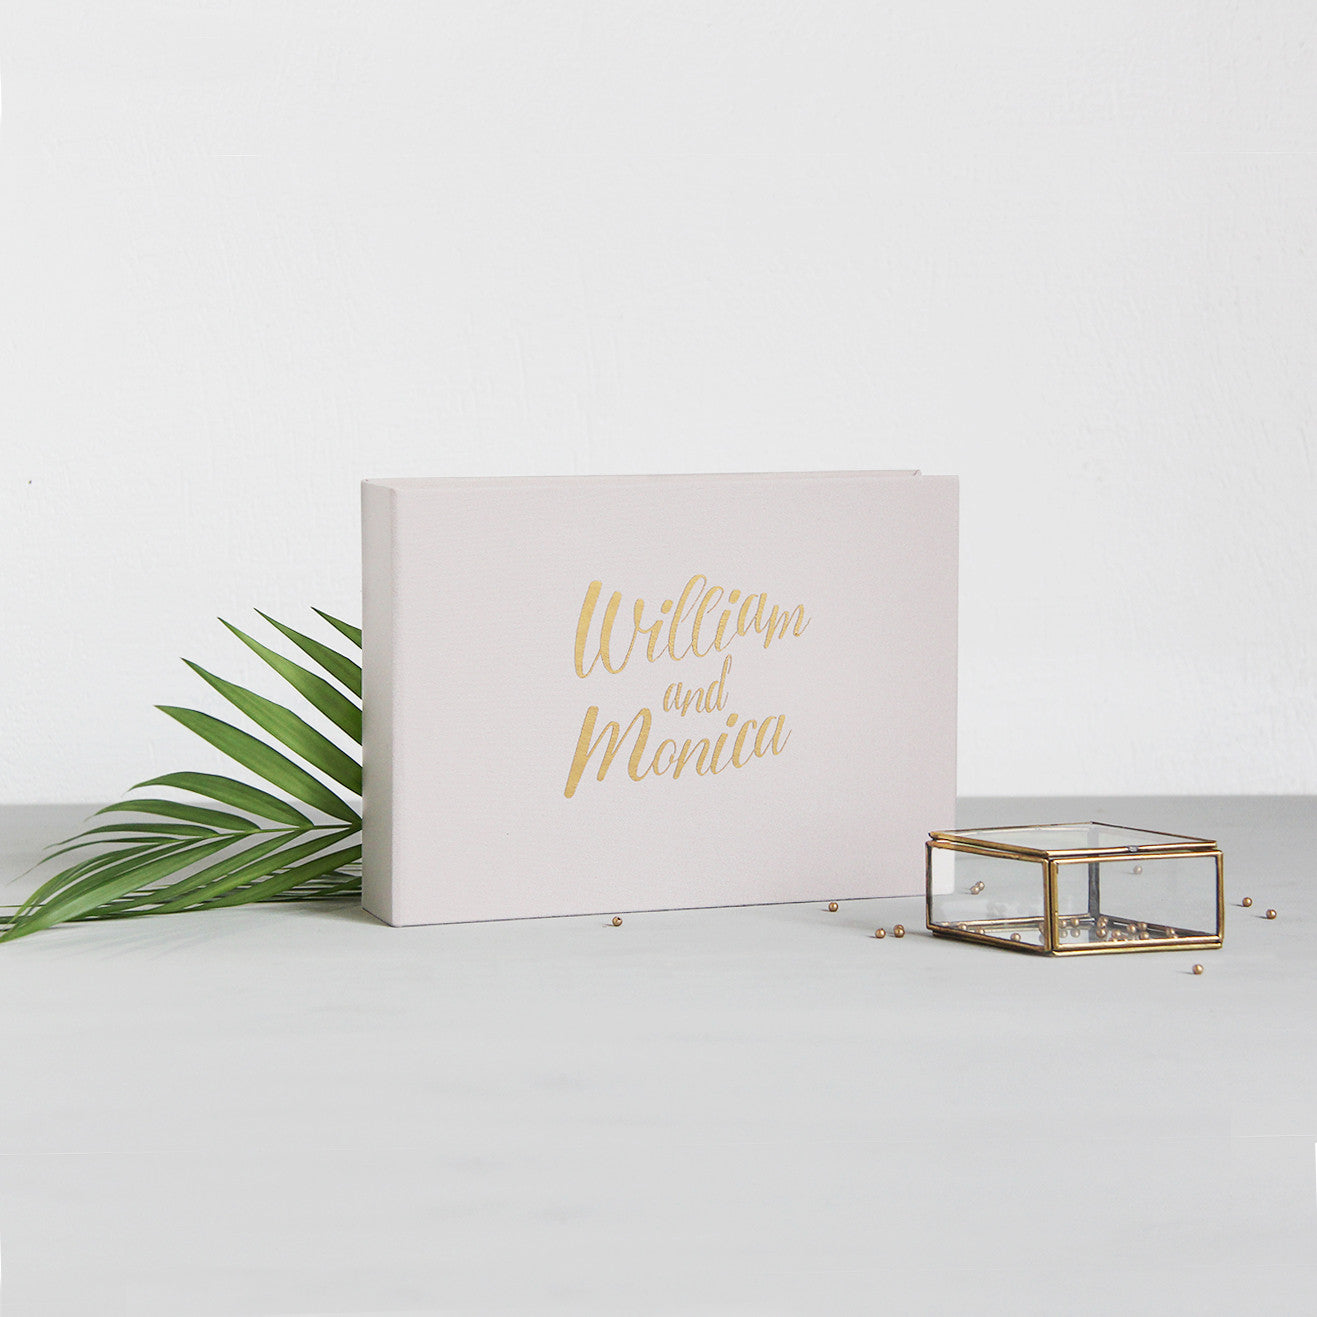 Guest Book Sign in Book Instant Album Cream with Gold Foil Lettering, Birthday Album by Liumy - Liumy 